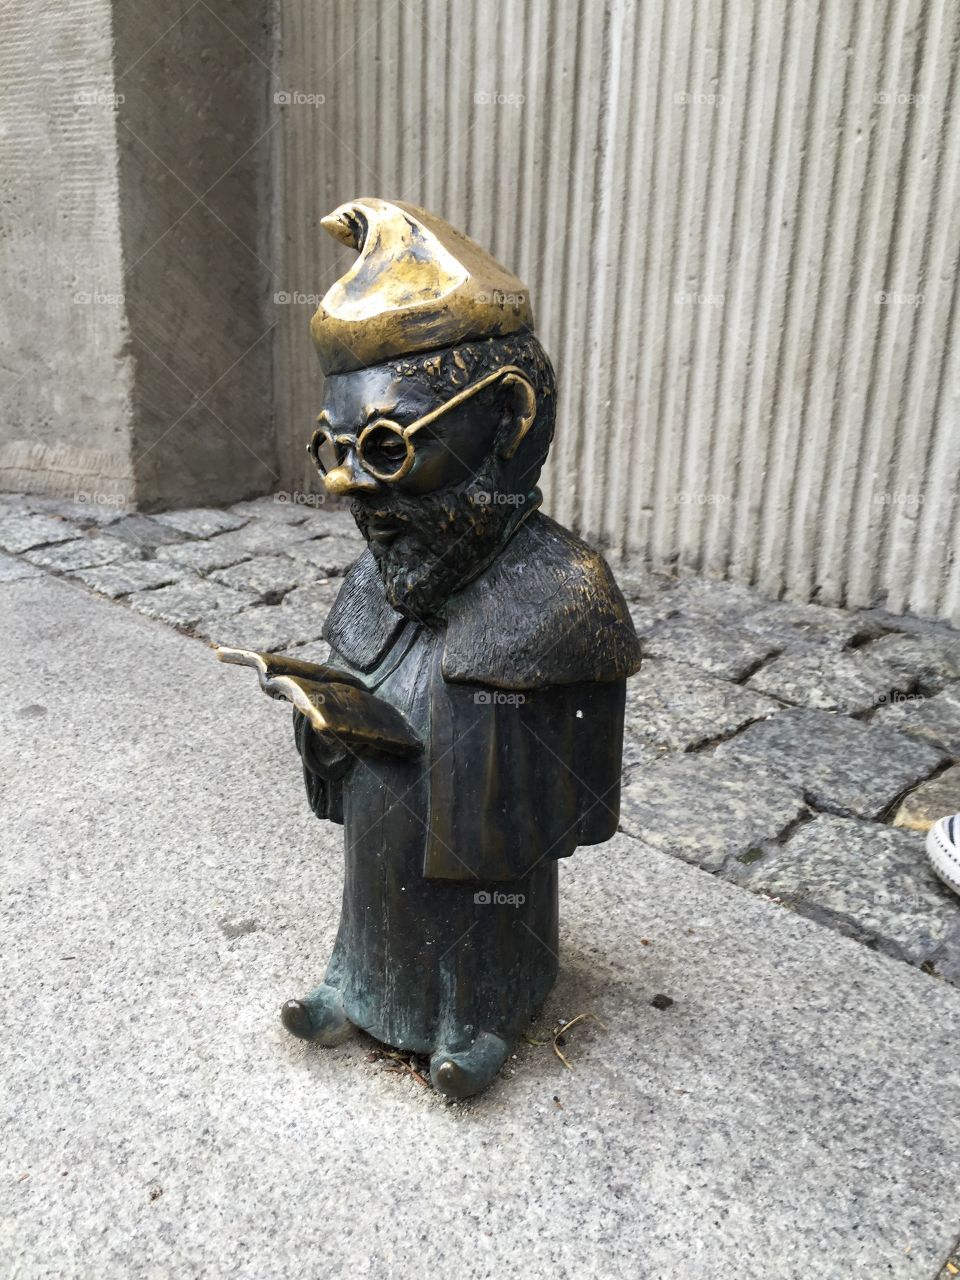 Wrocław's dwarfs are small figurines that first appeared in the streets of Wrocław, Poland